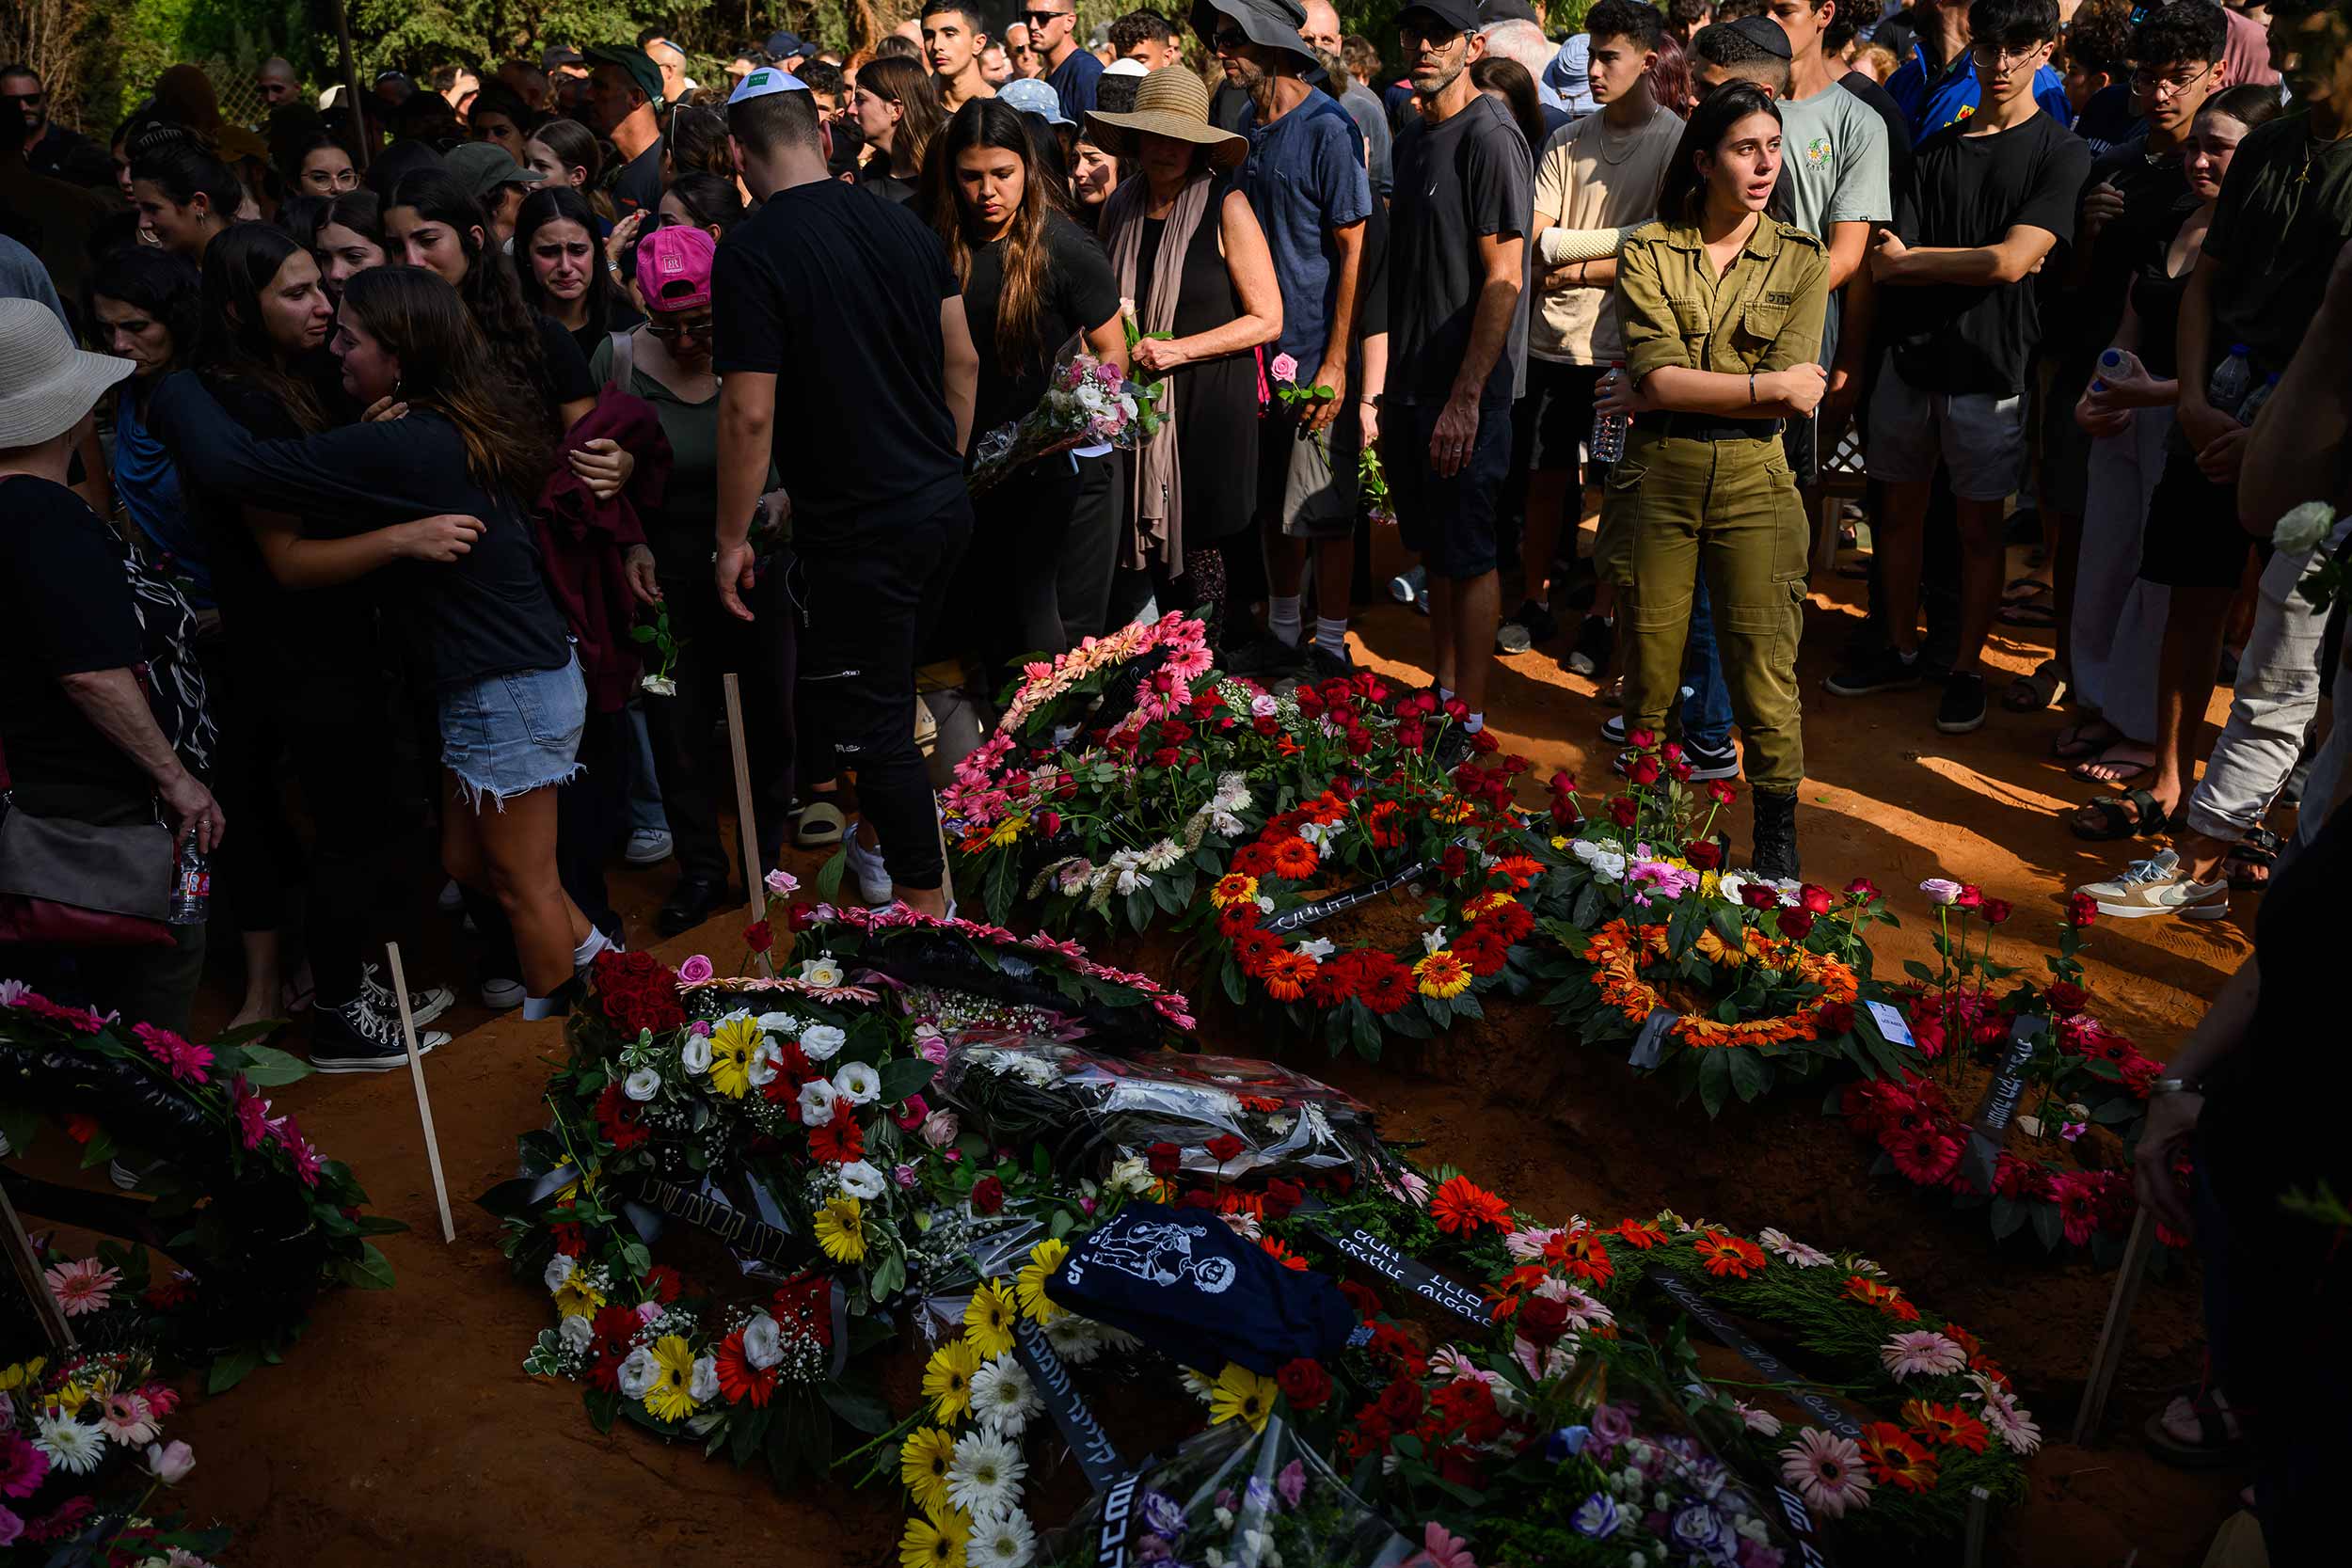 Friends and family pay their respects at the joint funerals of Dana and Carmel Becher, a mother and son who were killed during the Hamas attack of 7/10 on Kibbutz Be'eri on October 24, 2023 in Rehovot, Israel. Carmel's father was injured during the attacks in which he witnessed the deaths of his wife and son, and has since had a leg amputated. The family chose to bury Carmel with his favourite surf board. © Leon Neal/Getty Images